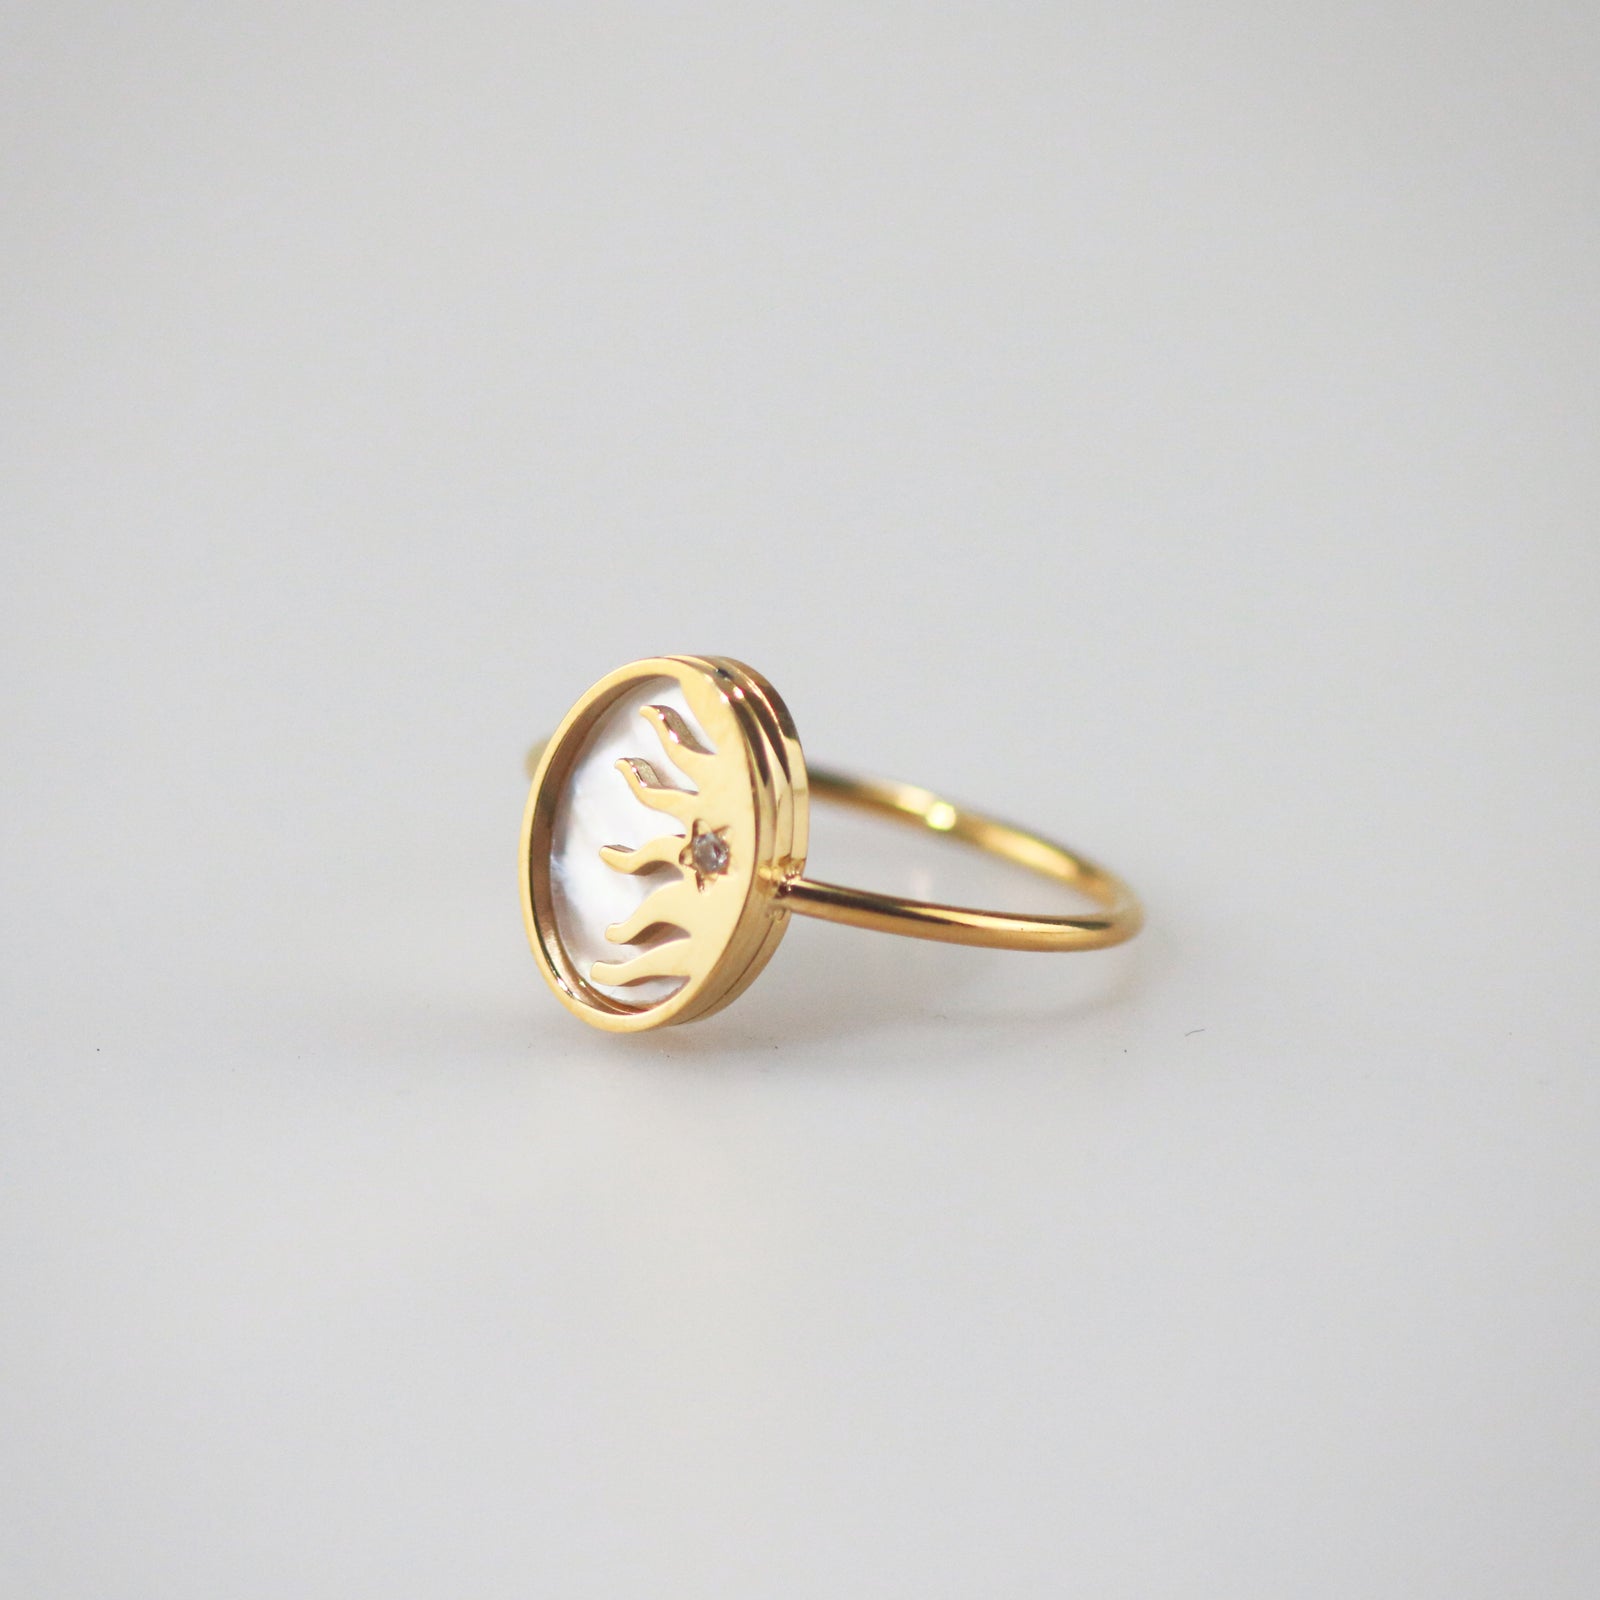 Meideya Jewelry Mother of Pearl and Sunshine Ring